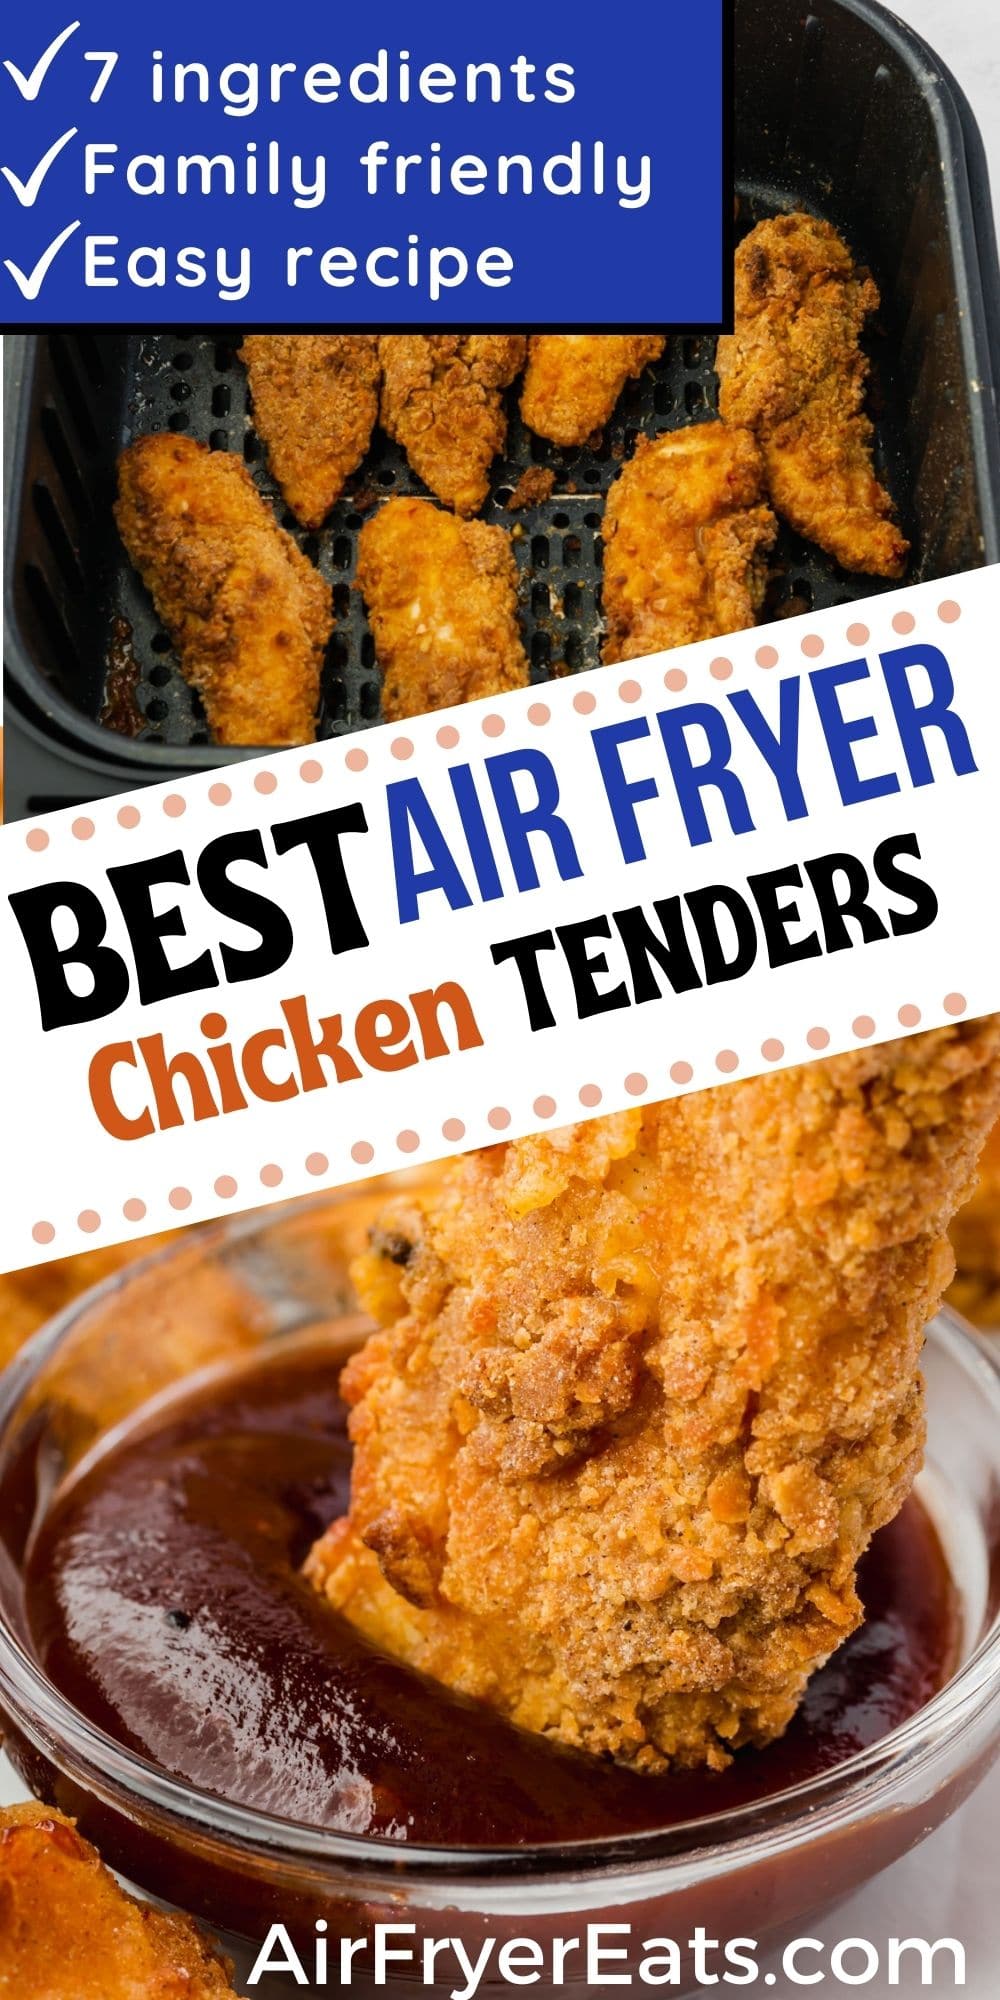 two photos of air fryer chicken tenders with text overlay for pinterest